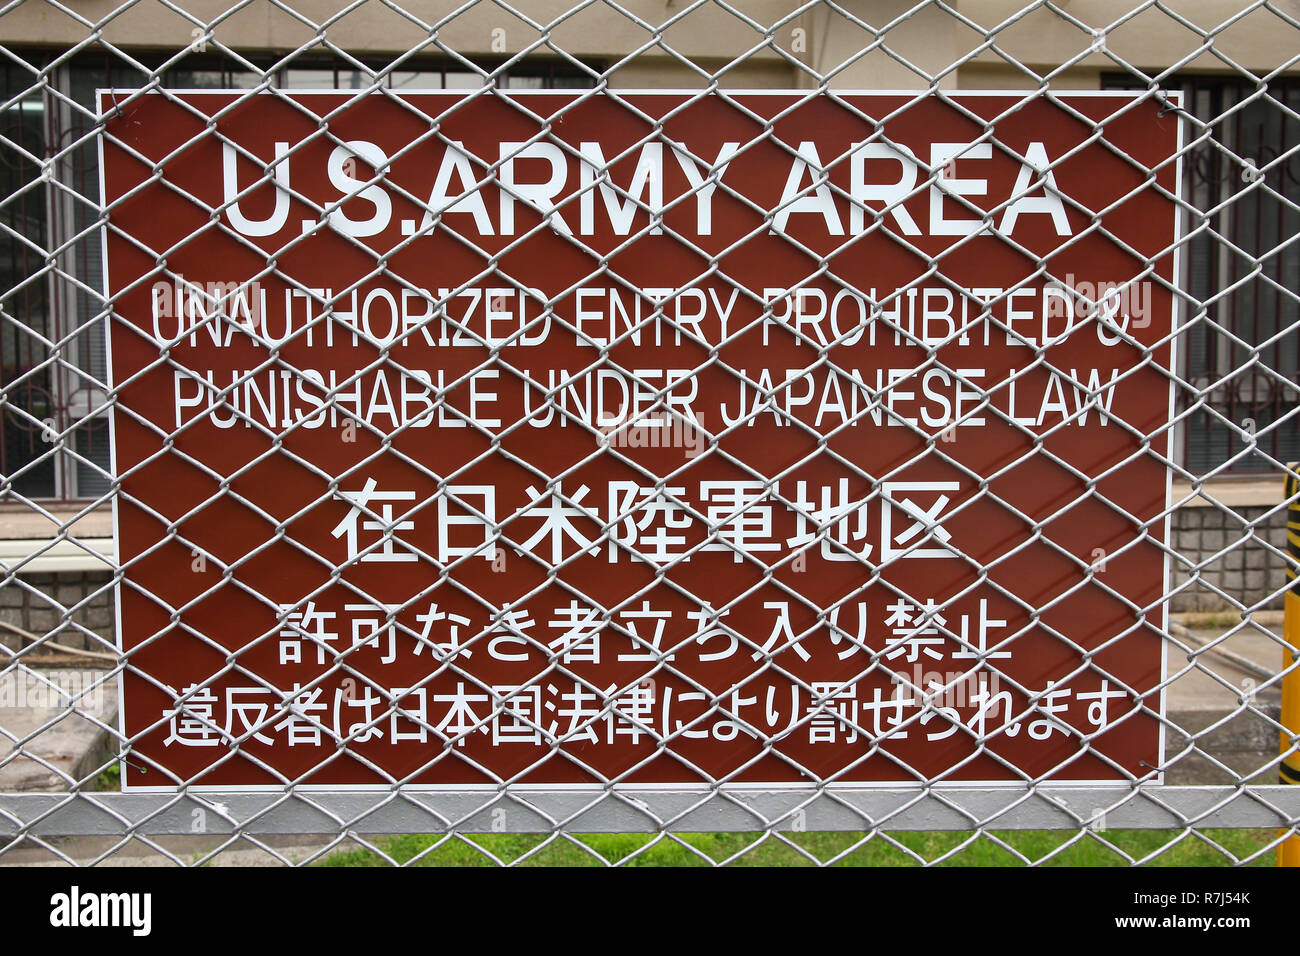 US Army military base in Tokyo, Japan - no trespassing sign on a steel fence Stock Photo